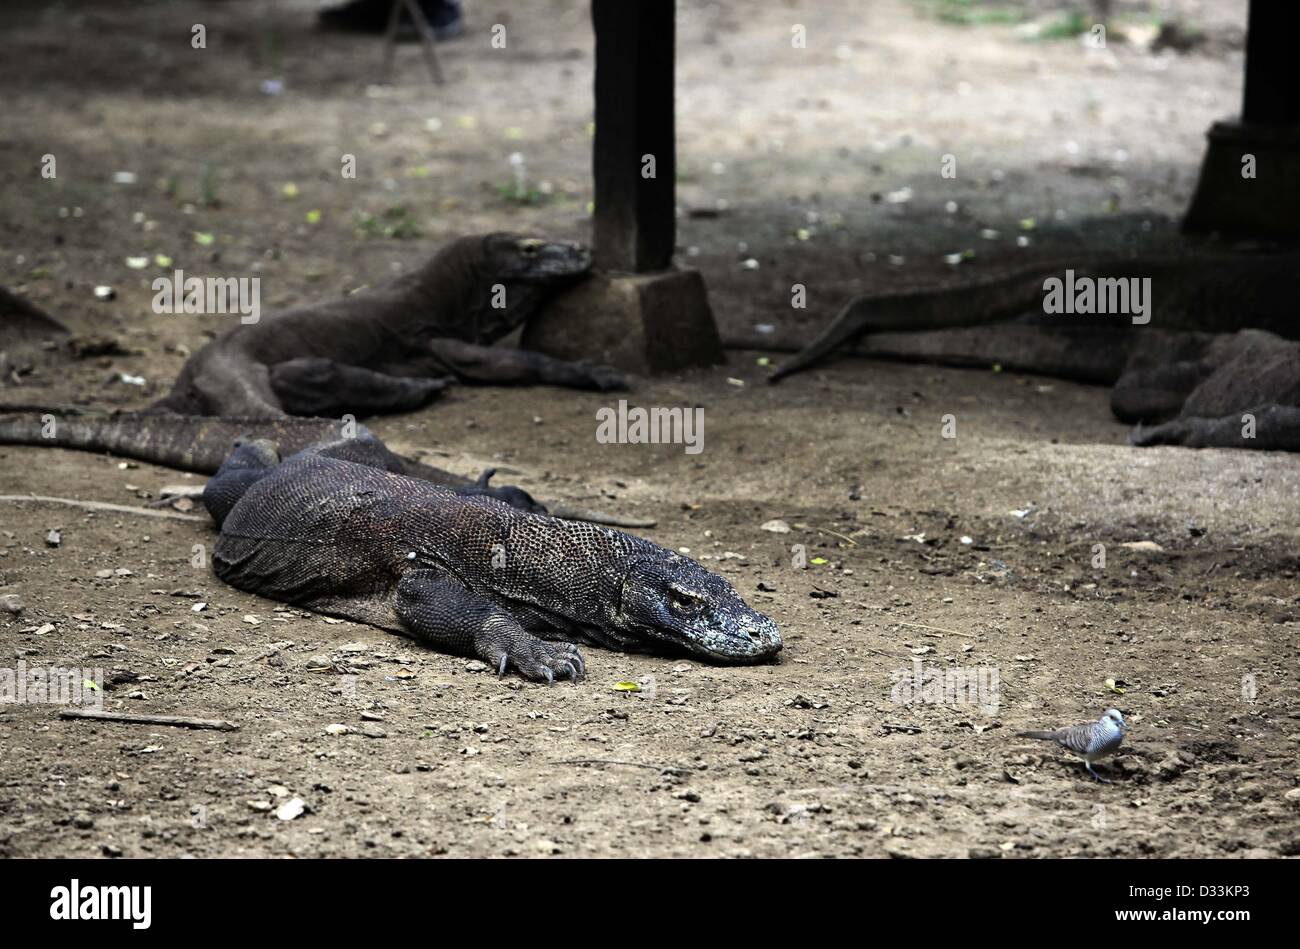 Feb. 8, 2013 - Flores, Indonesia - February 08, 2013 - Rinca Island, Flores, Indonesia ; UNDATED PHOTO - A doves were feeding near the Komodo dragon (Varanus komodoensis) in Rinca Island, Komodo National Park, Flores, Indonesia. Komodo dragons hunt and ambush prey including invertebrates, birds, and mammals. Their group behaviour in hunting is.exceptional in the reptile world. The diet of big Komodo dragons.mainly consists of deer, though they also eat considerable amounts of.carrion. Komodo dragons also occasionally attack humans in the area of.West Manggarai Regency where they live in Indone Stock Photo